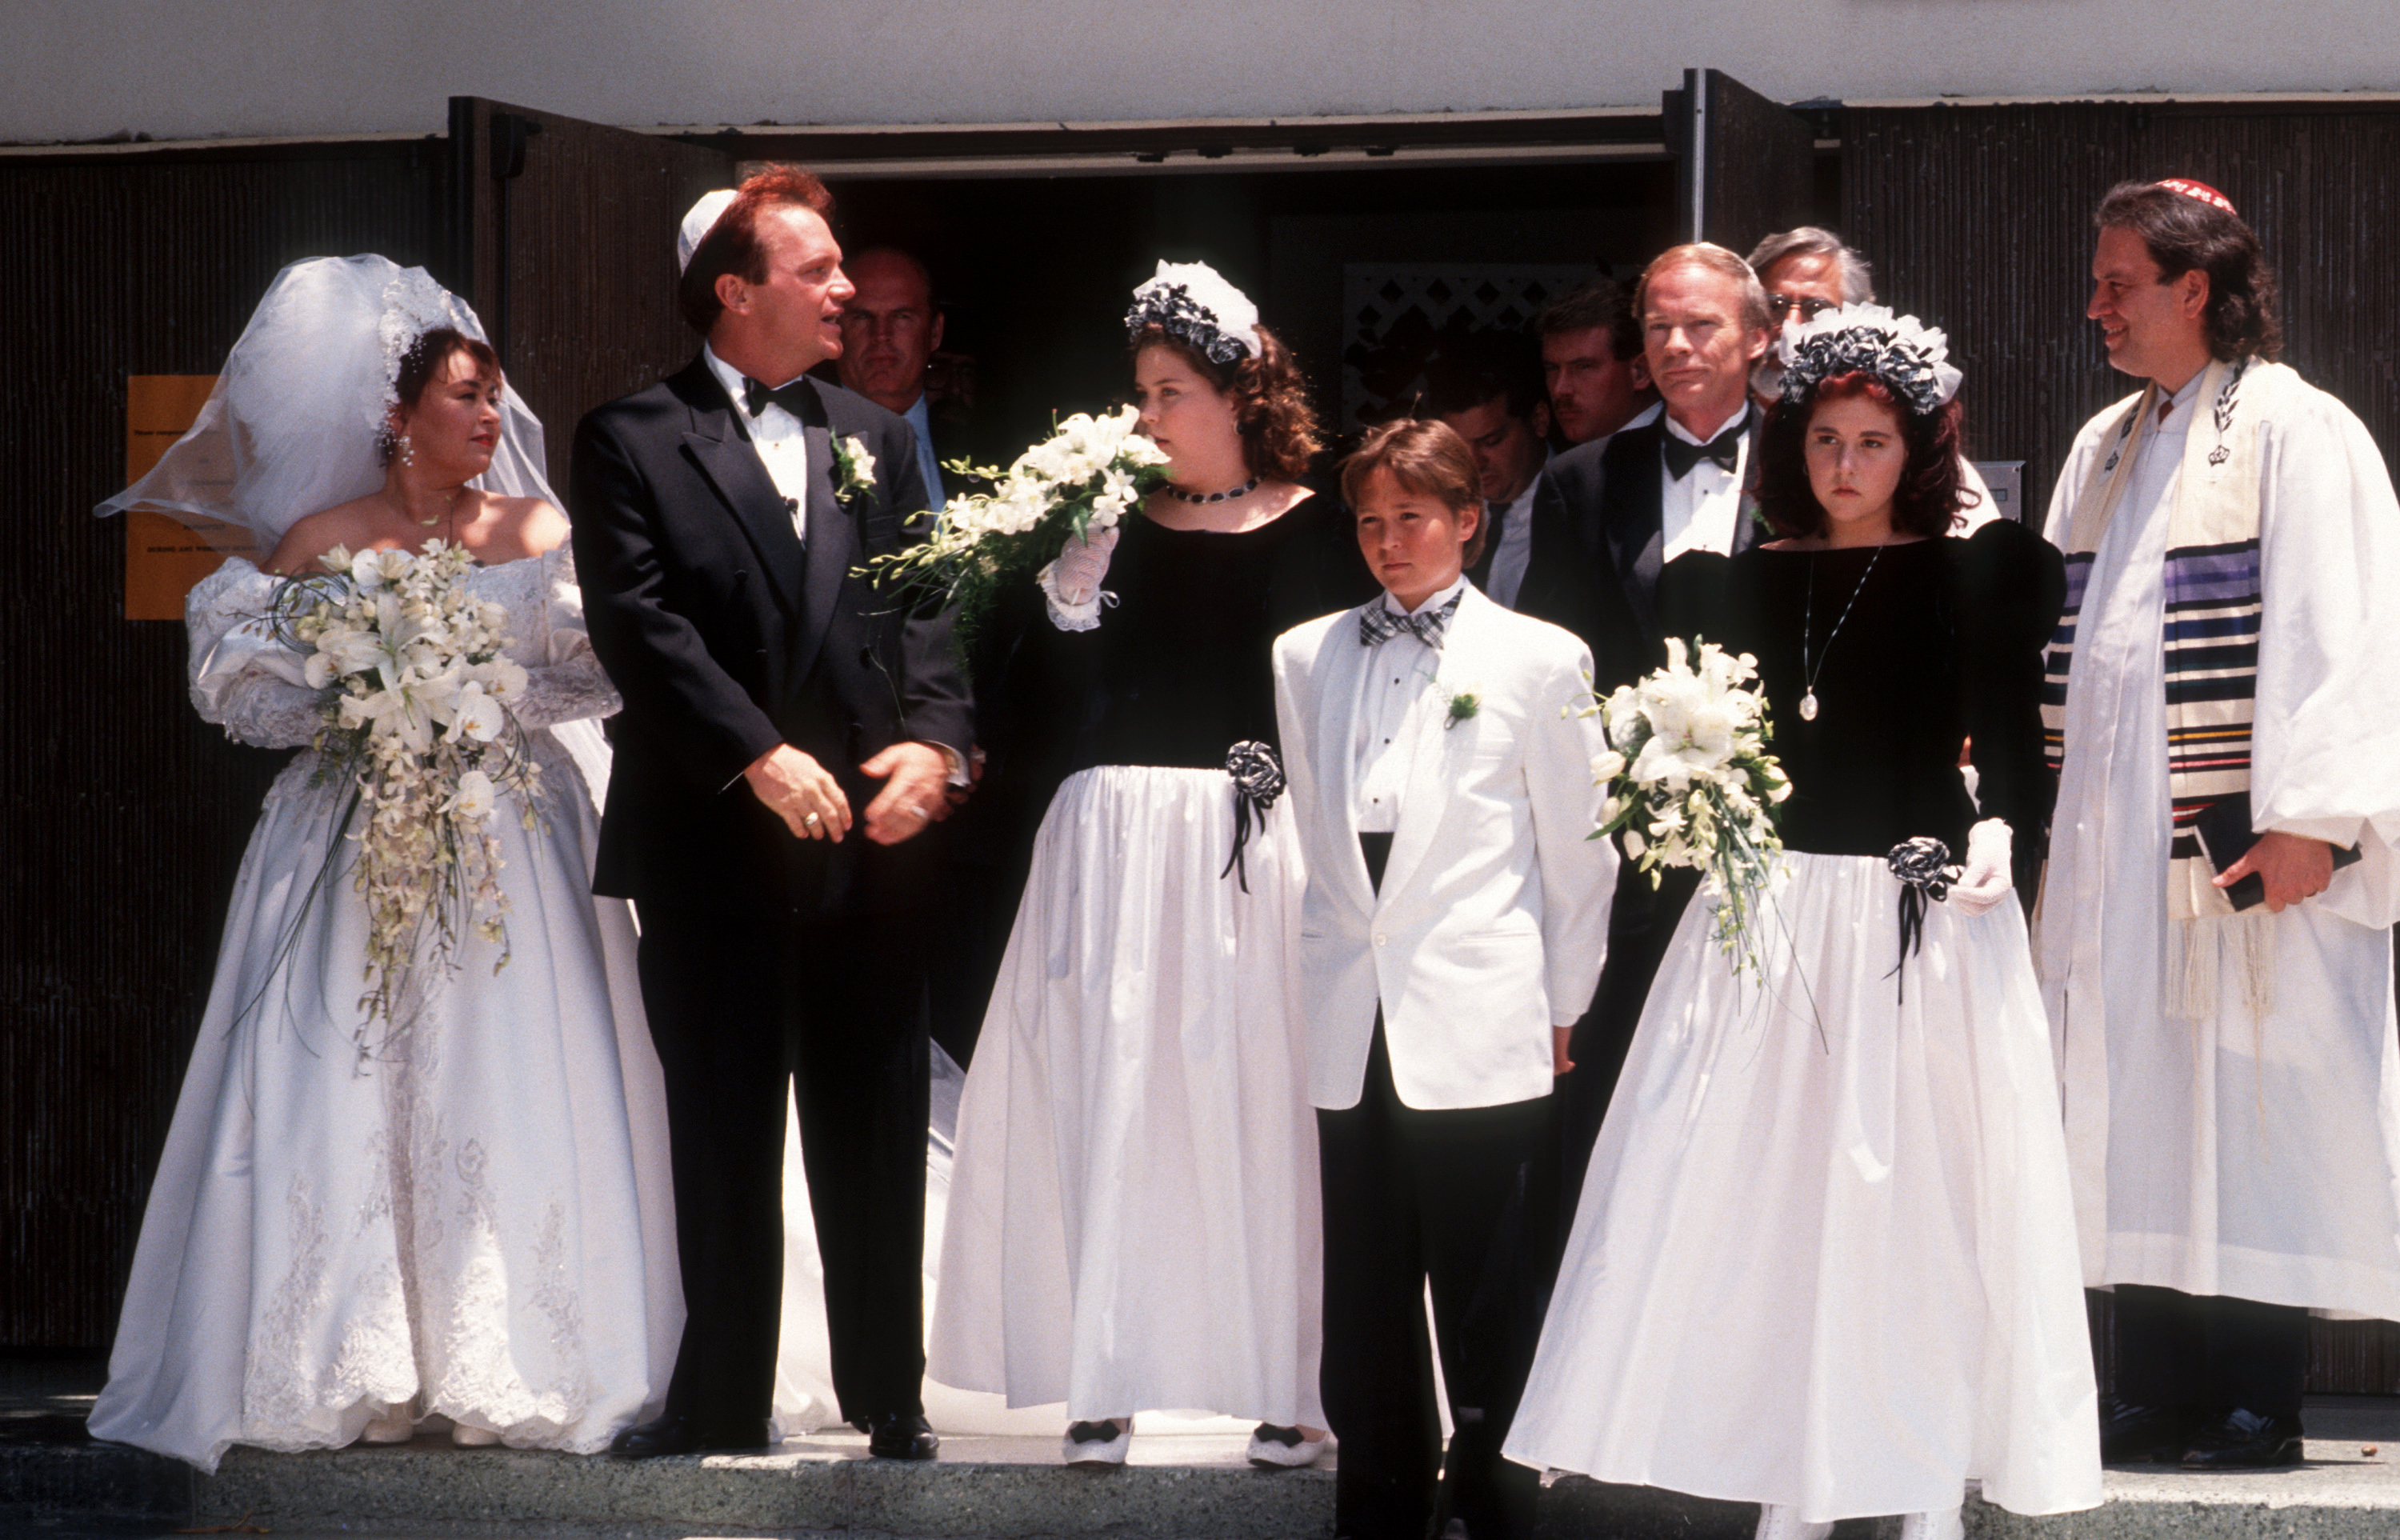 Roseanne Barr, Tom Arnold, and family during the couple's wedding on June 23, 1991 at University's Synogague in Los Angeles, California | Source: Getty Images